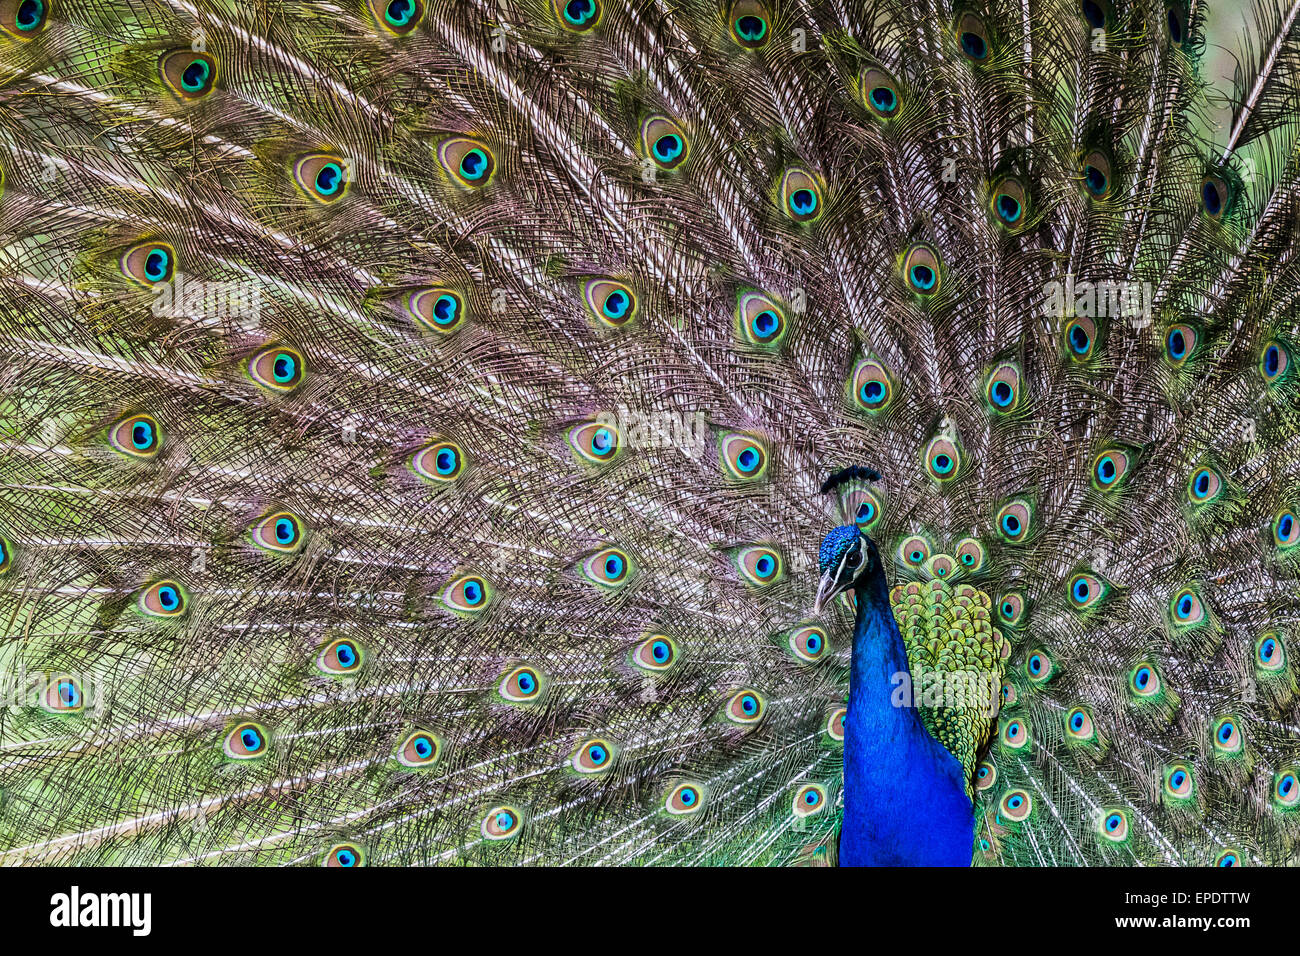 Portrait of a peacock. Stock Photo